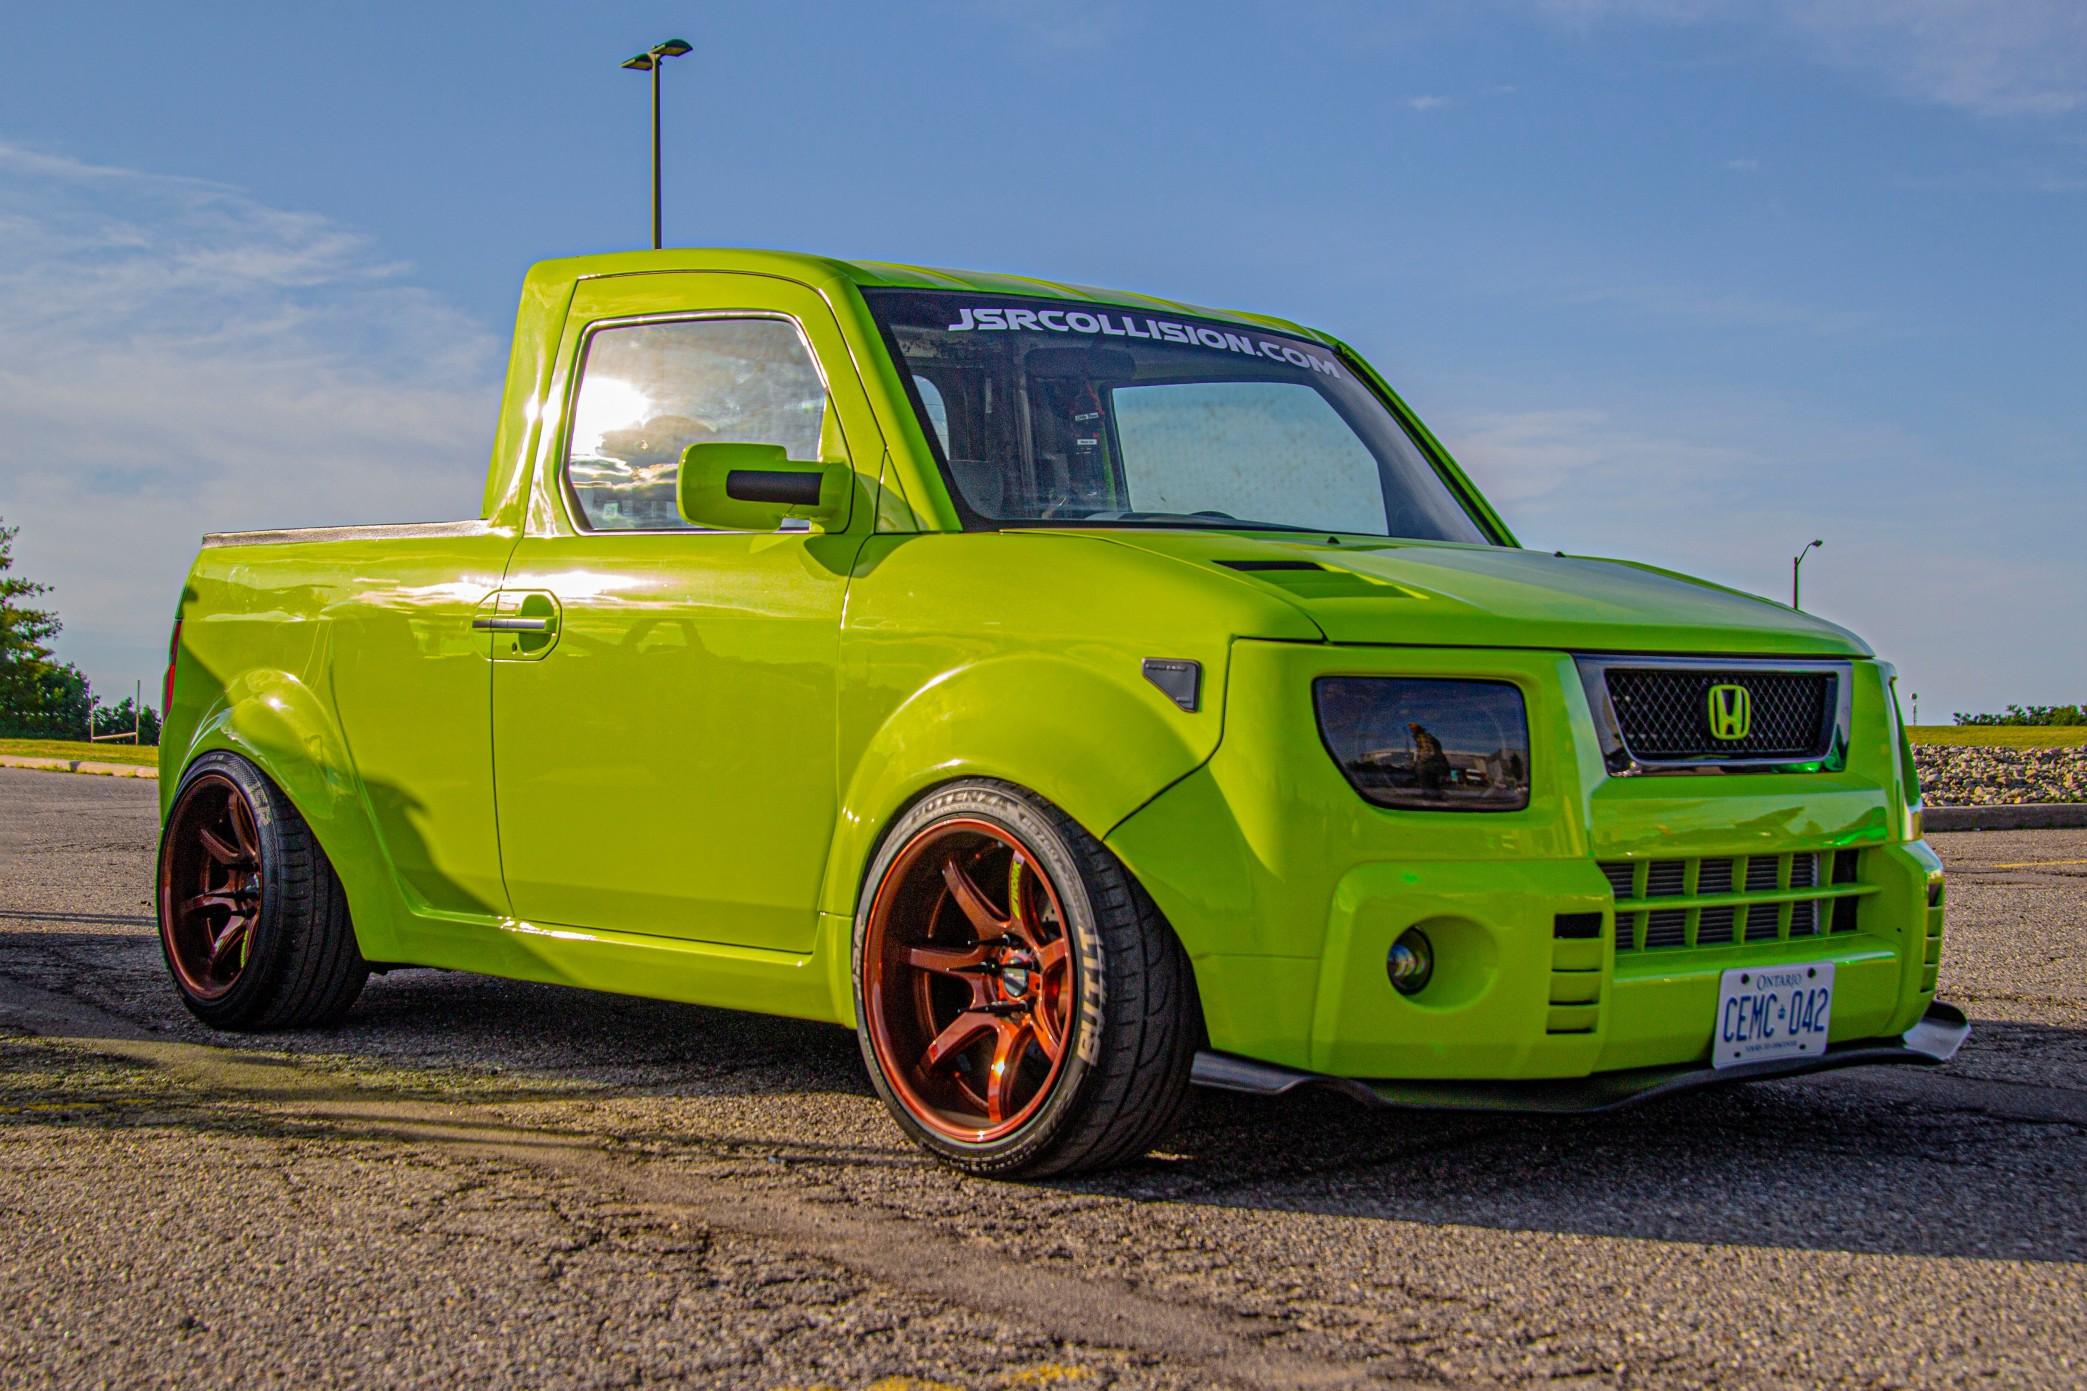 ‘90s mini trucks were known for their super low ground clearance and loud paint jobs.